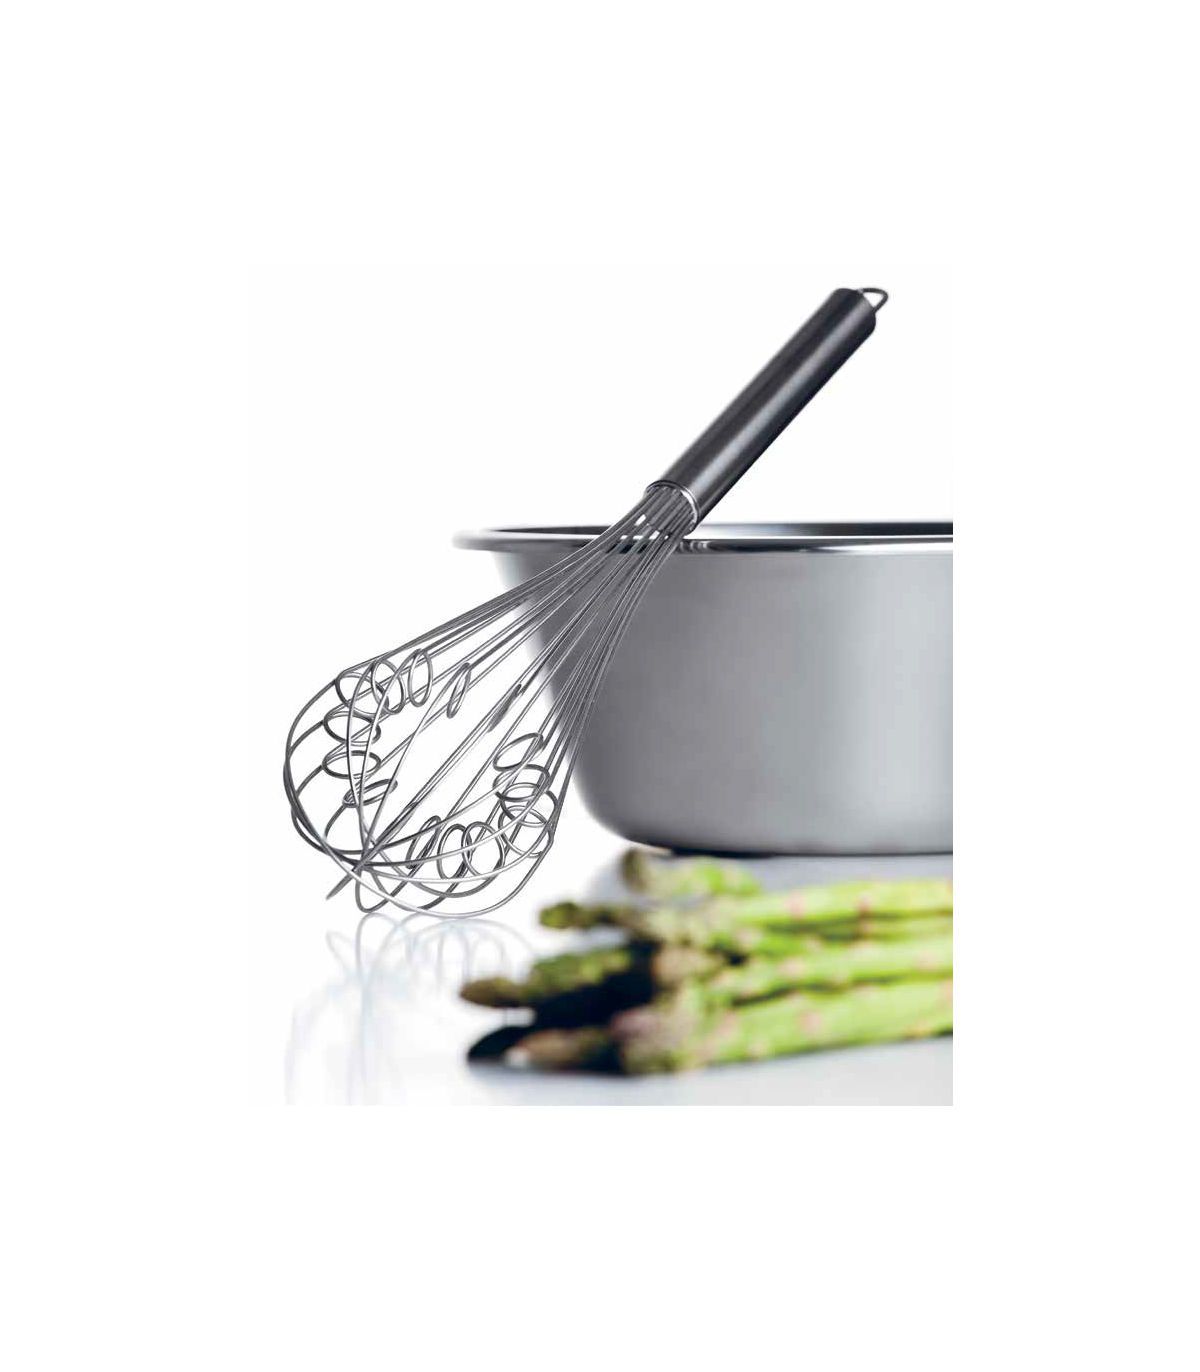 Sur La Table Stainless Steel Balloon Whisk, 6